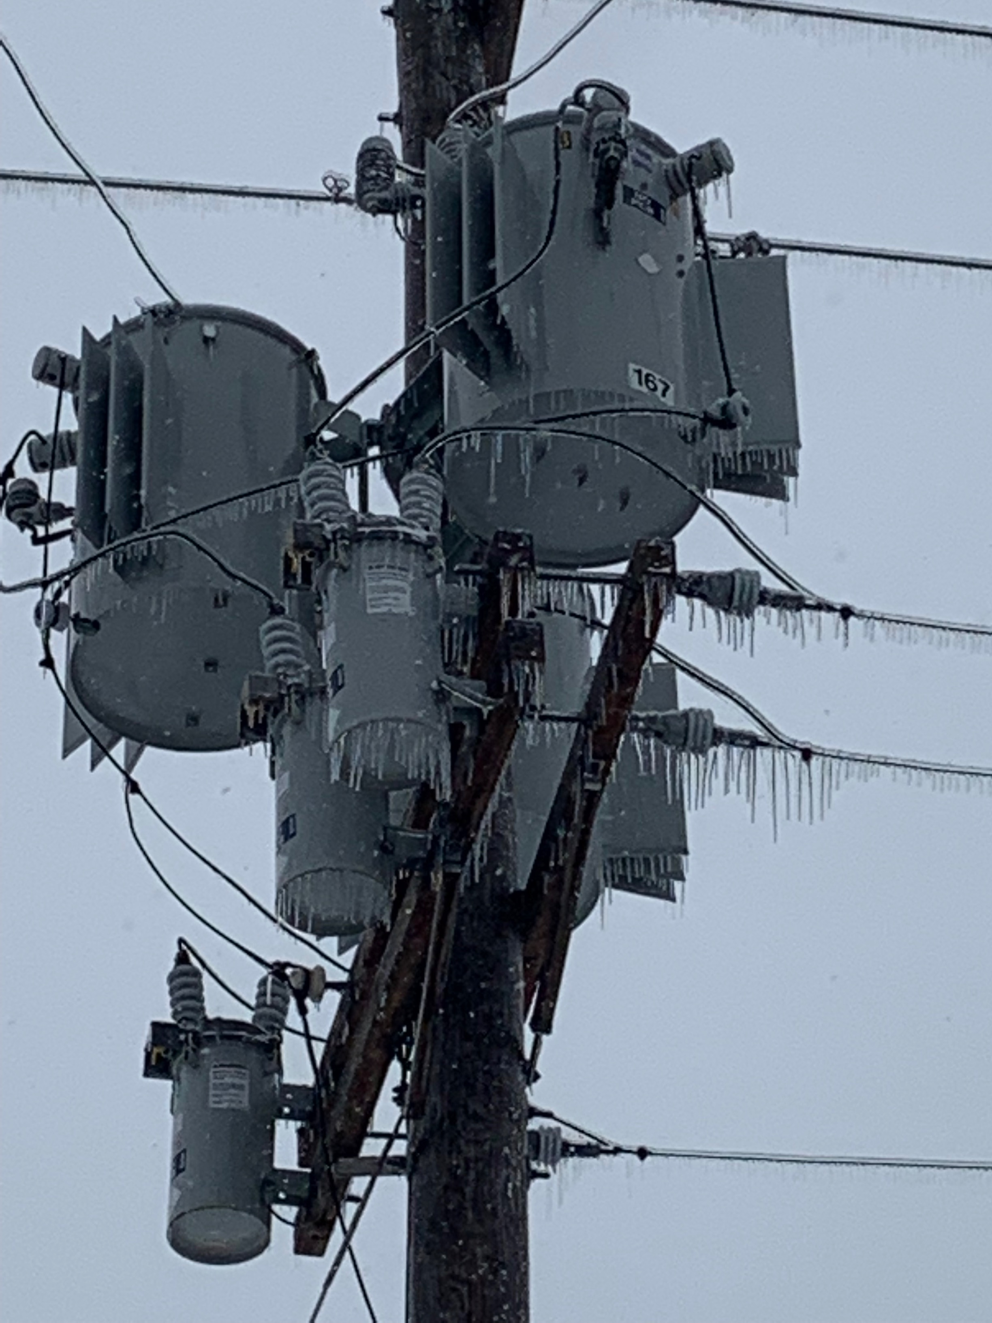 Duquesne Light Company Restores Power to Approximately 3,600 Customers Following Winter Storm